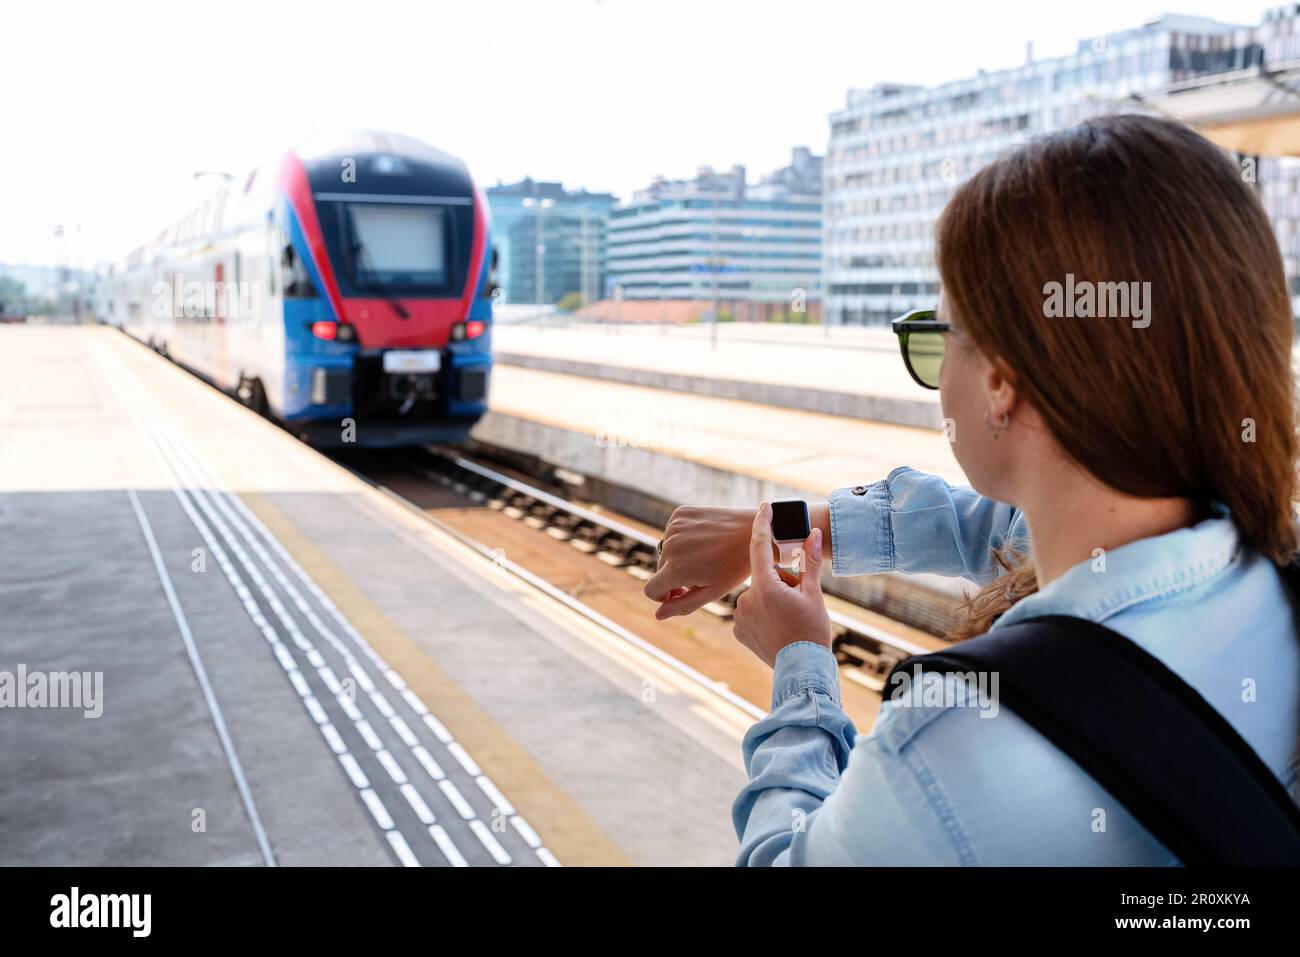 The passenger missed the train. A woman stands on the station platform and checks the time on her wrist watch. Stock Photo